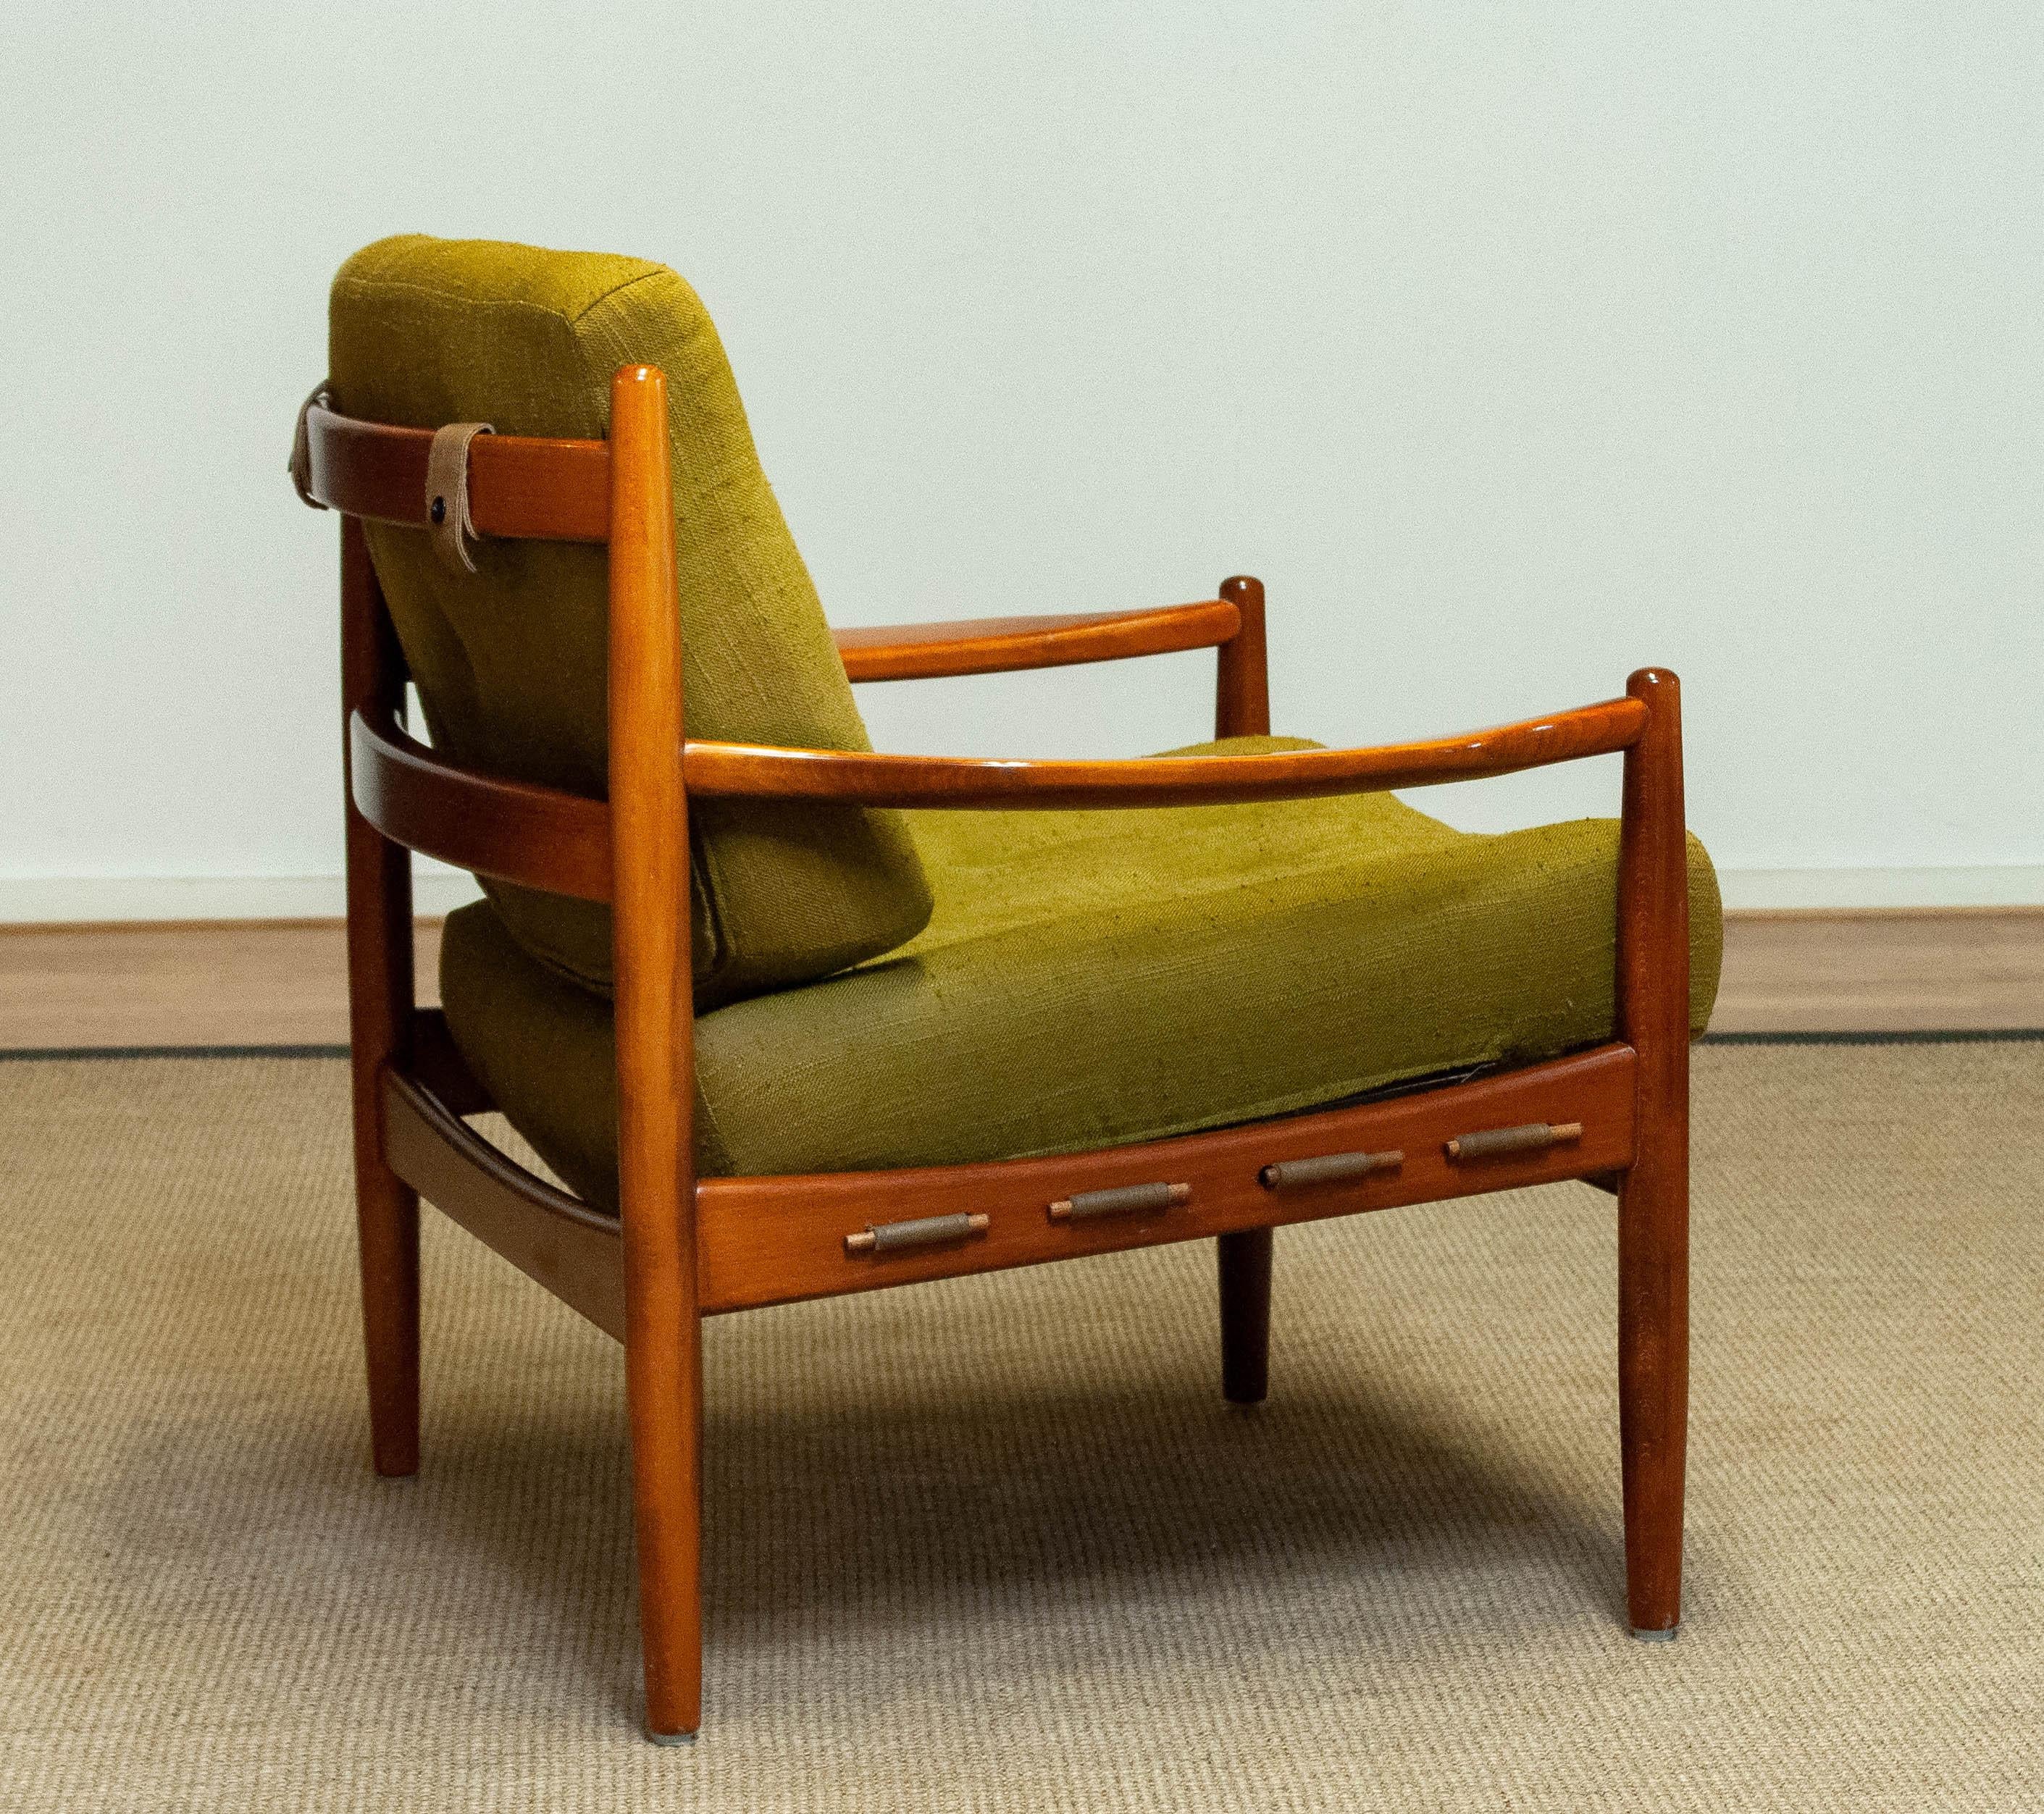 1960's Green Linen 'Läckö' Lounge Chair by Ingemar Thillmark for OPE Sweden For Sale 1